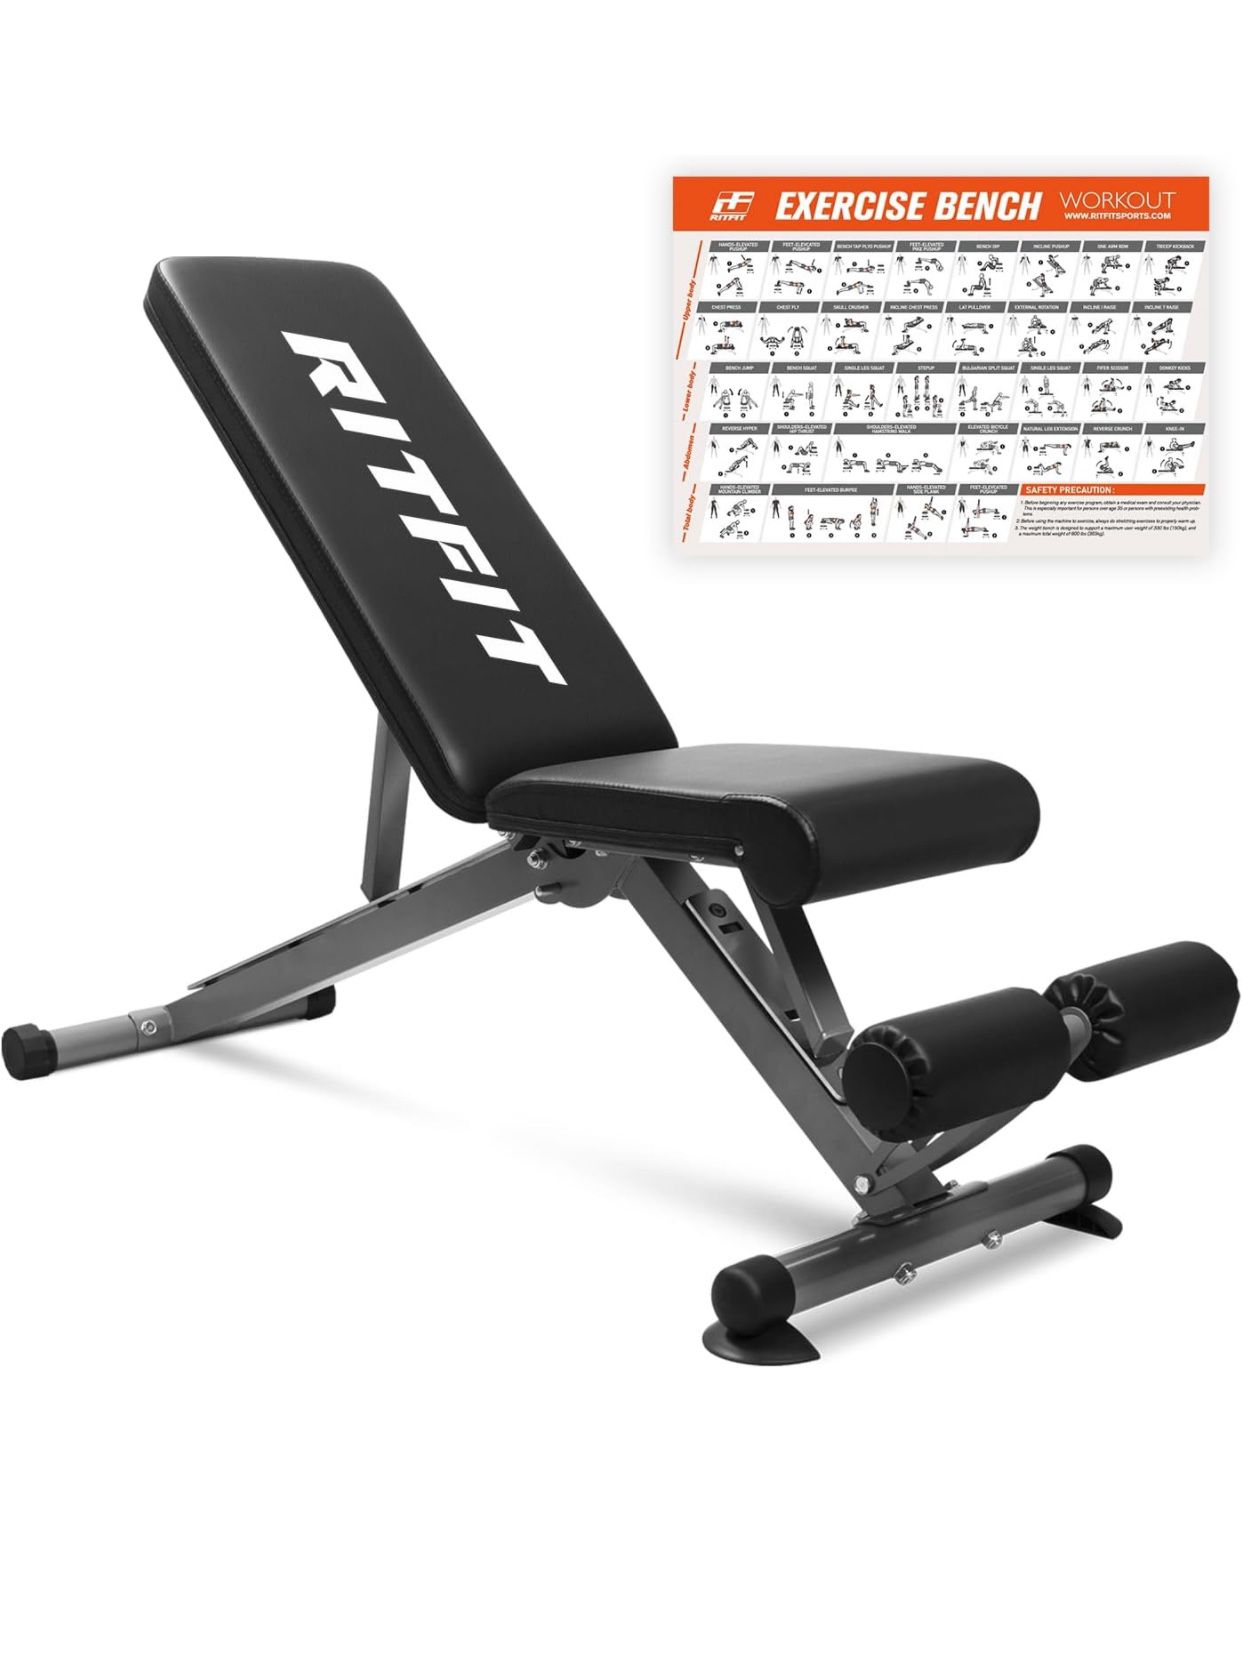 RitFit Adjustable Weight bench